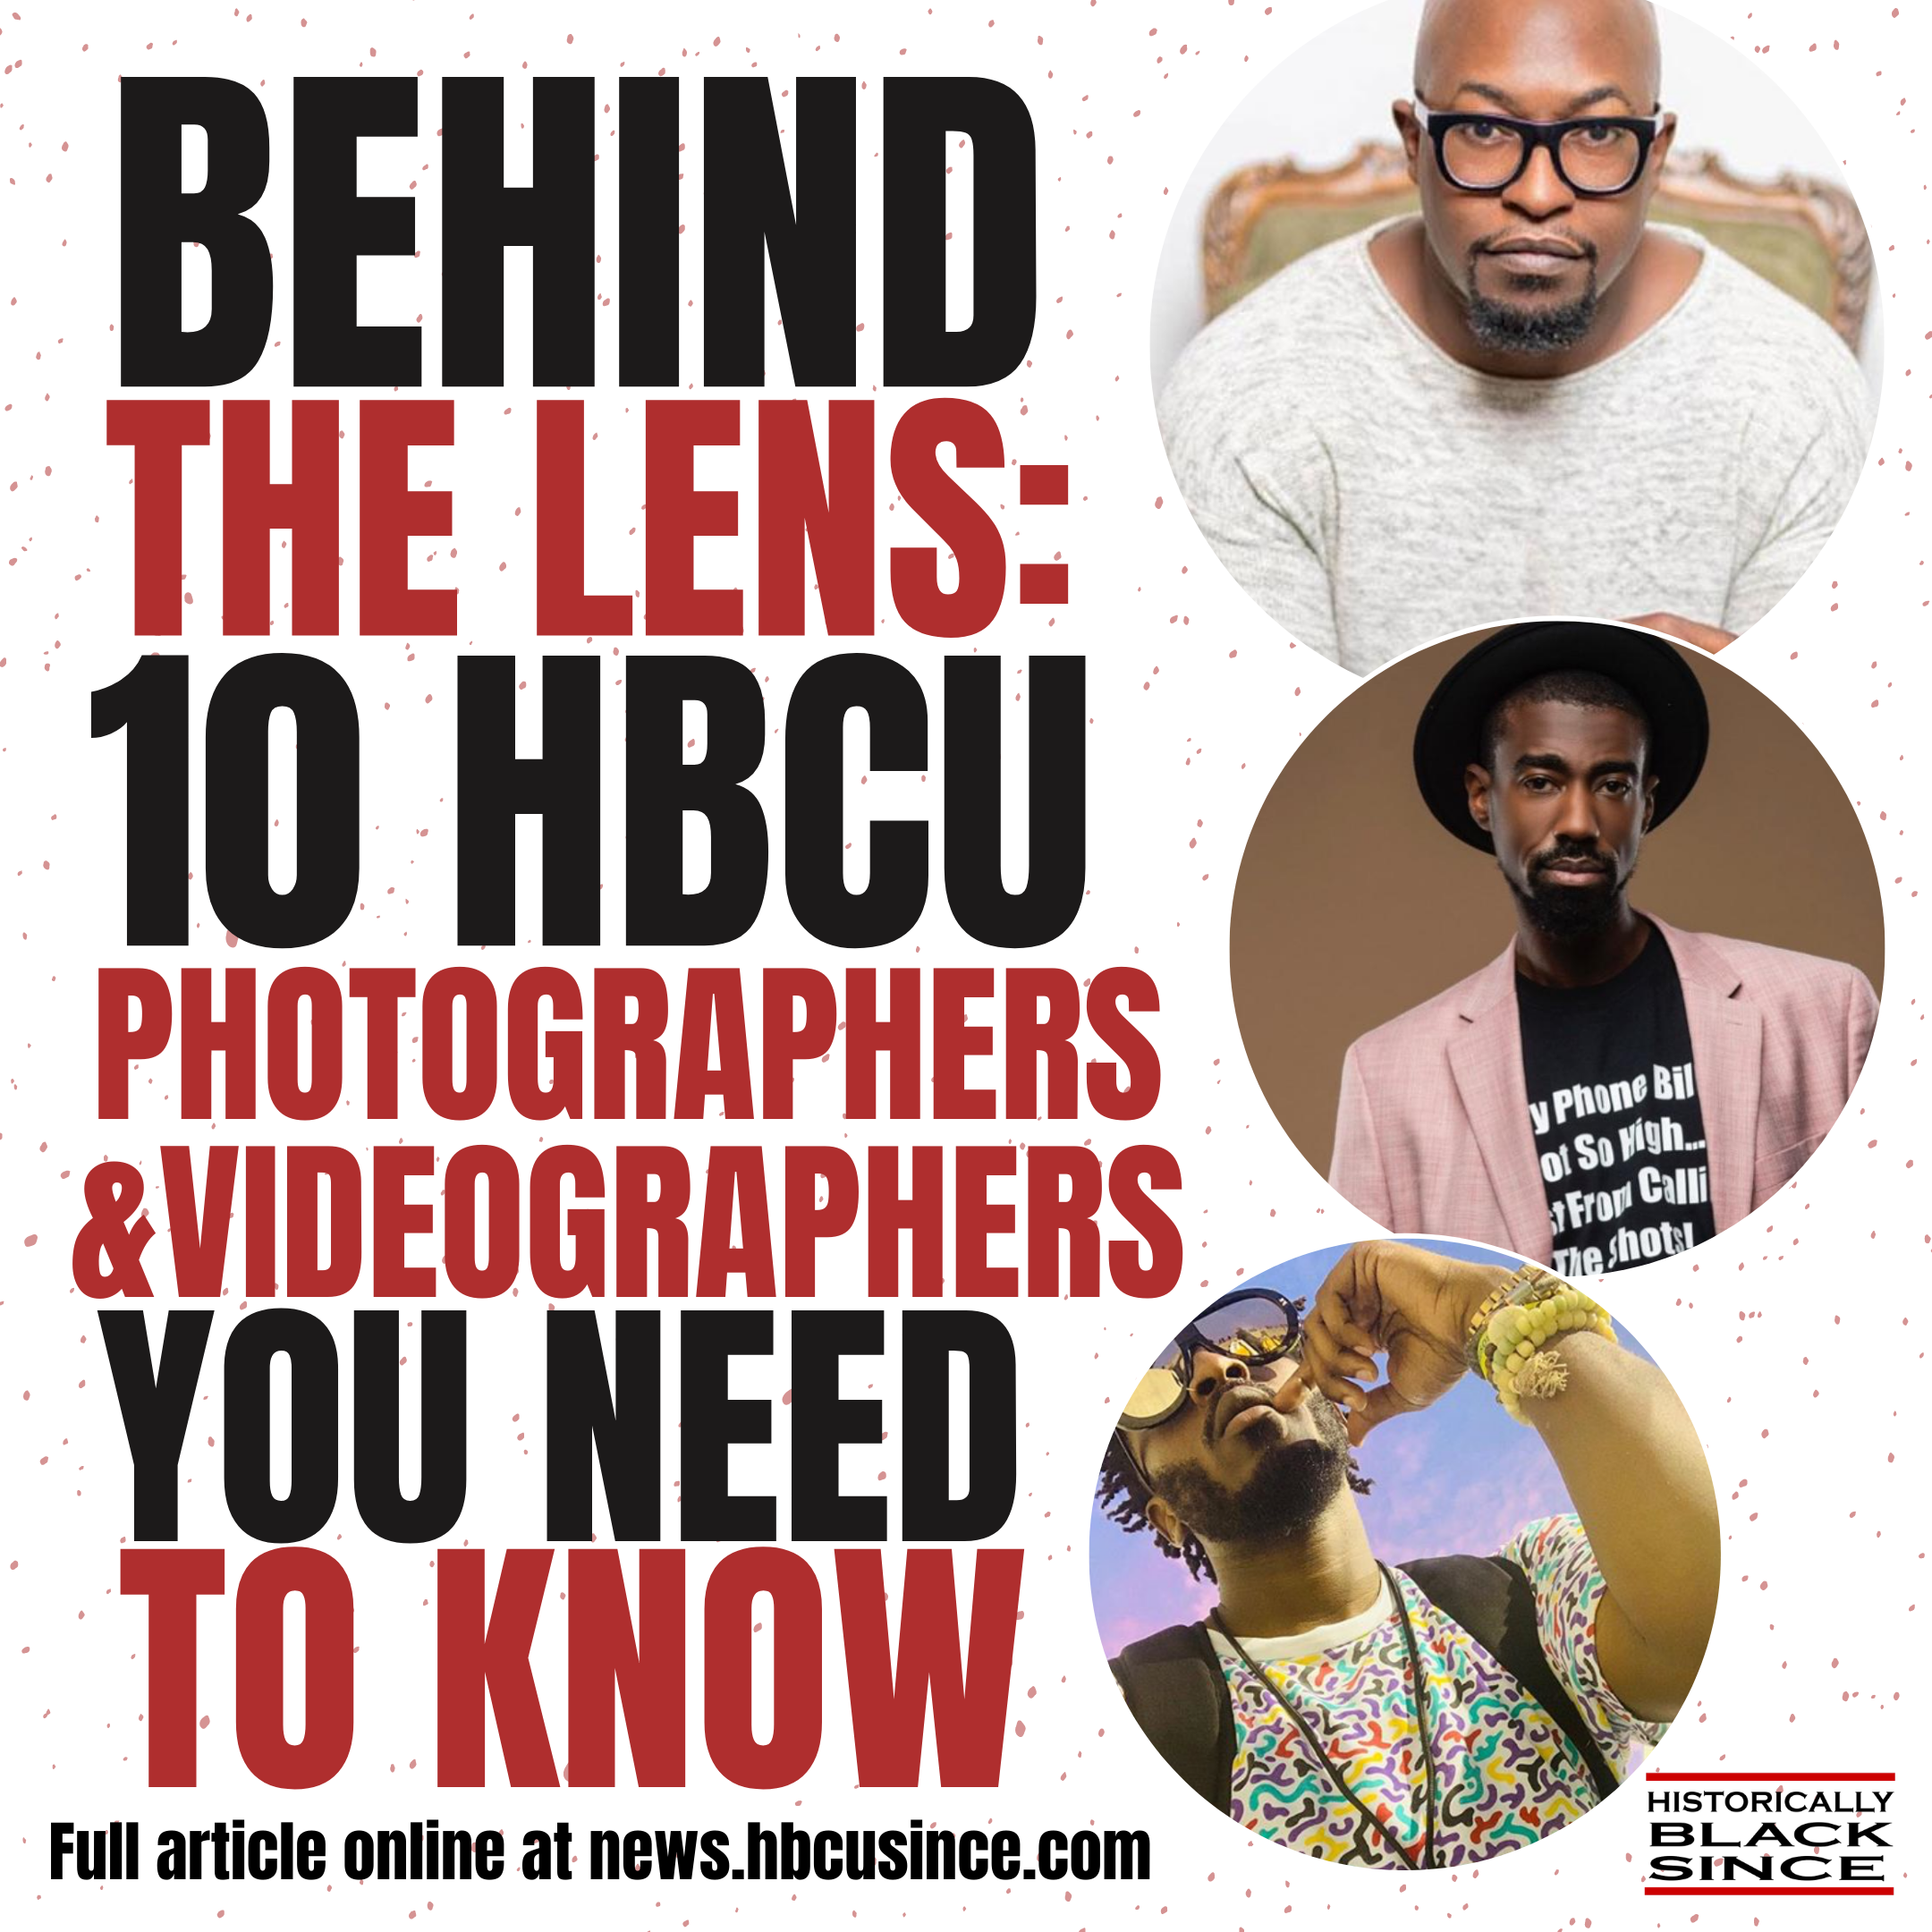 10 HBCU Photographers and Videographers You Need To Know